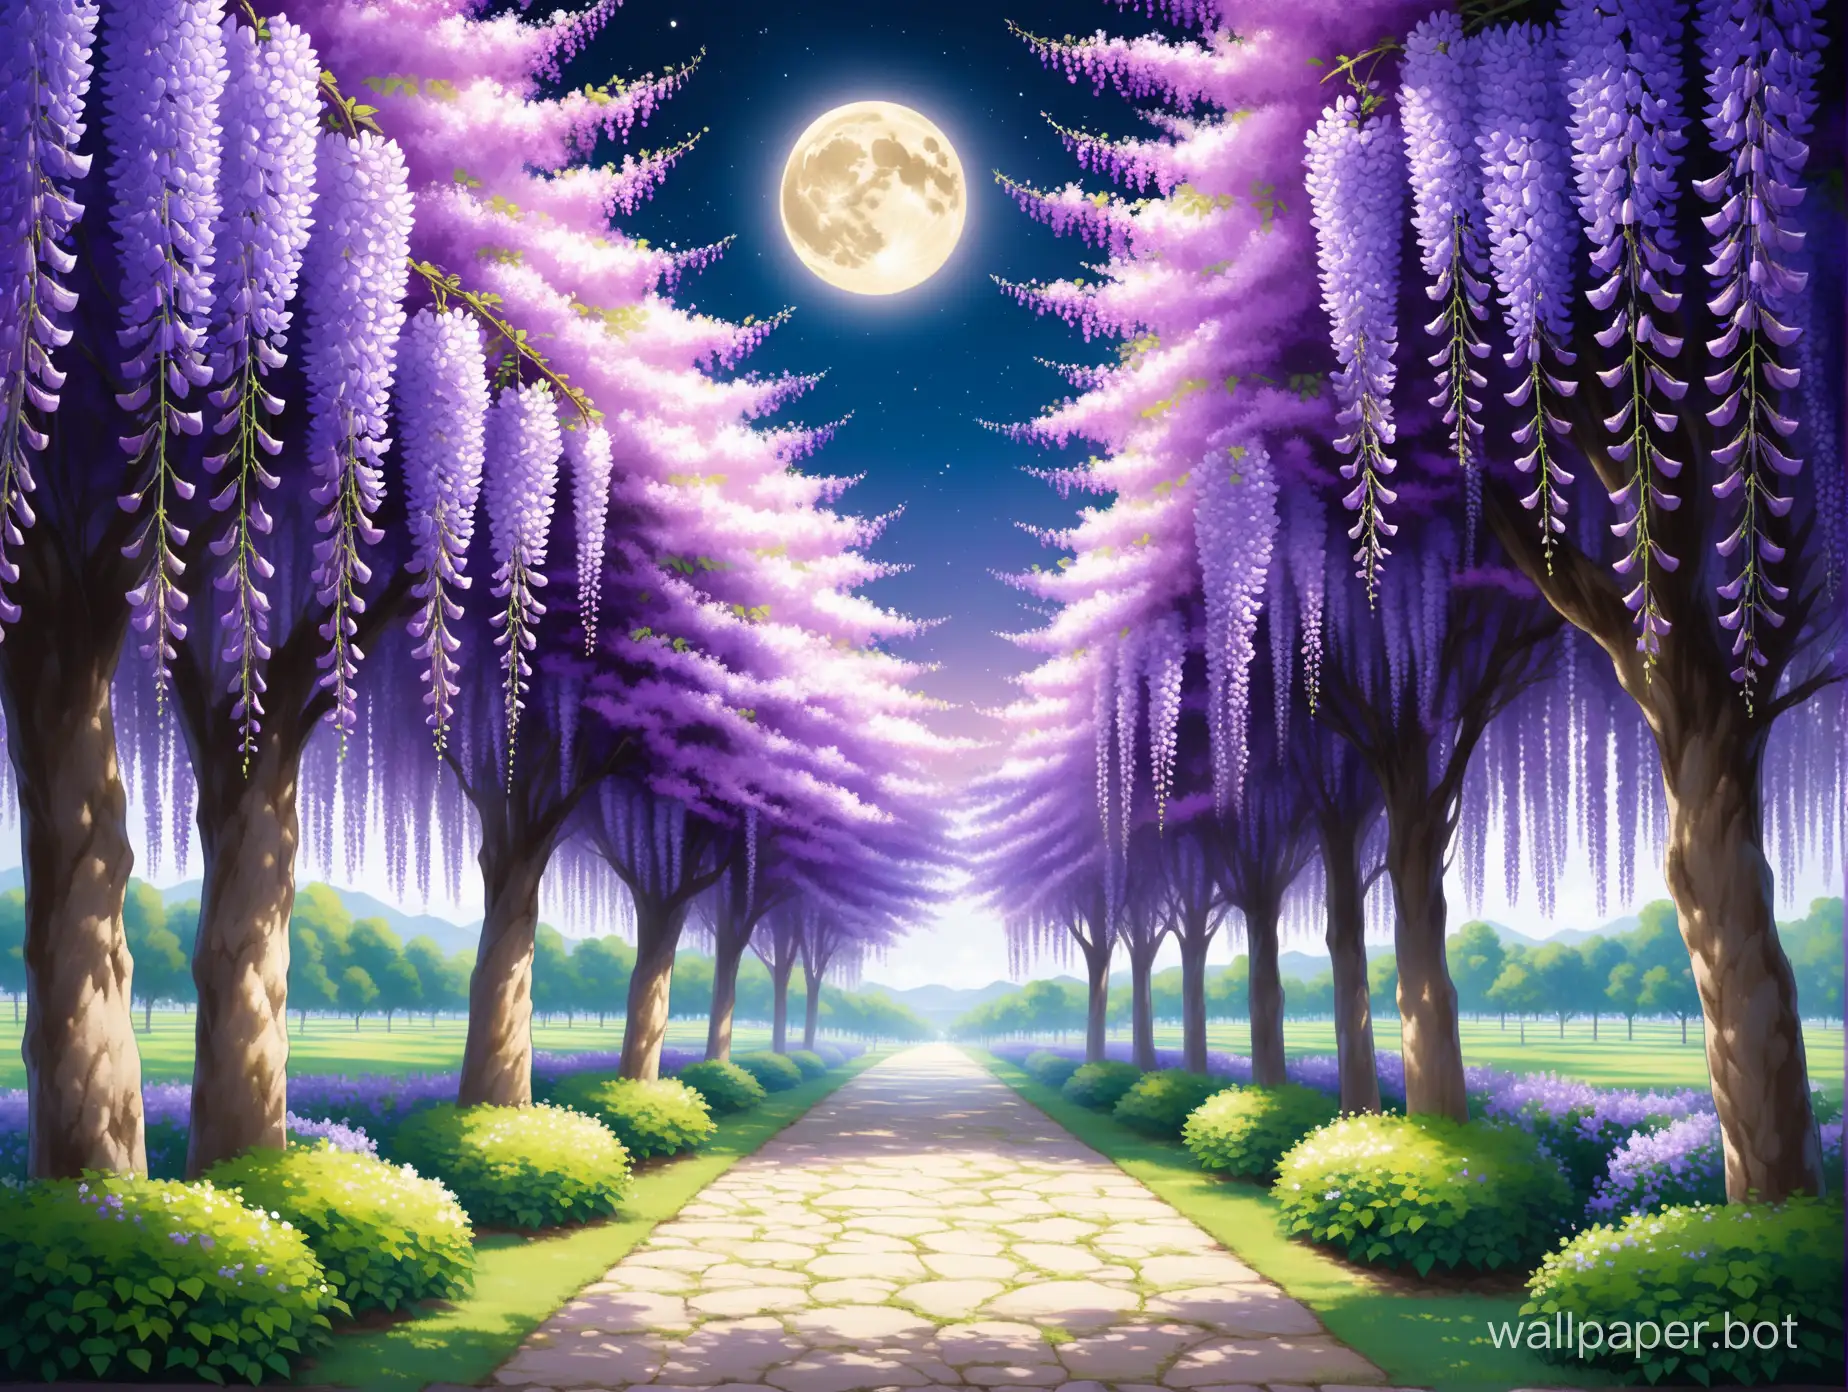 Tranquil-Stone-Path-Lined-with-Pastel-Purple-Wisteria-Trees-under-Moonlight